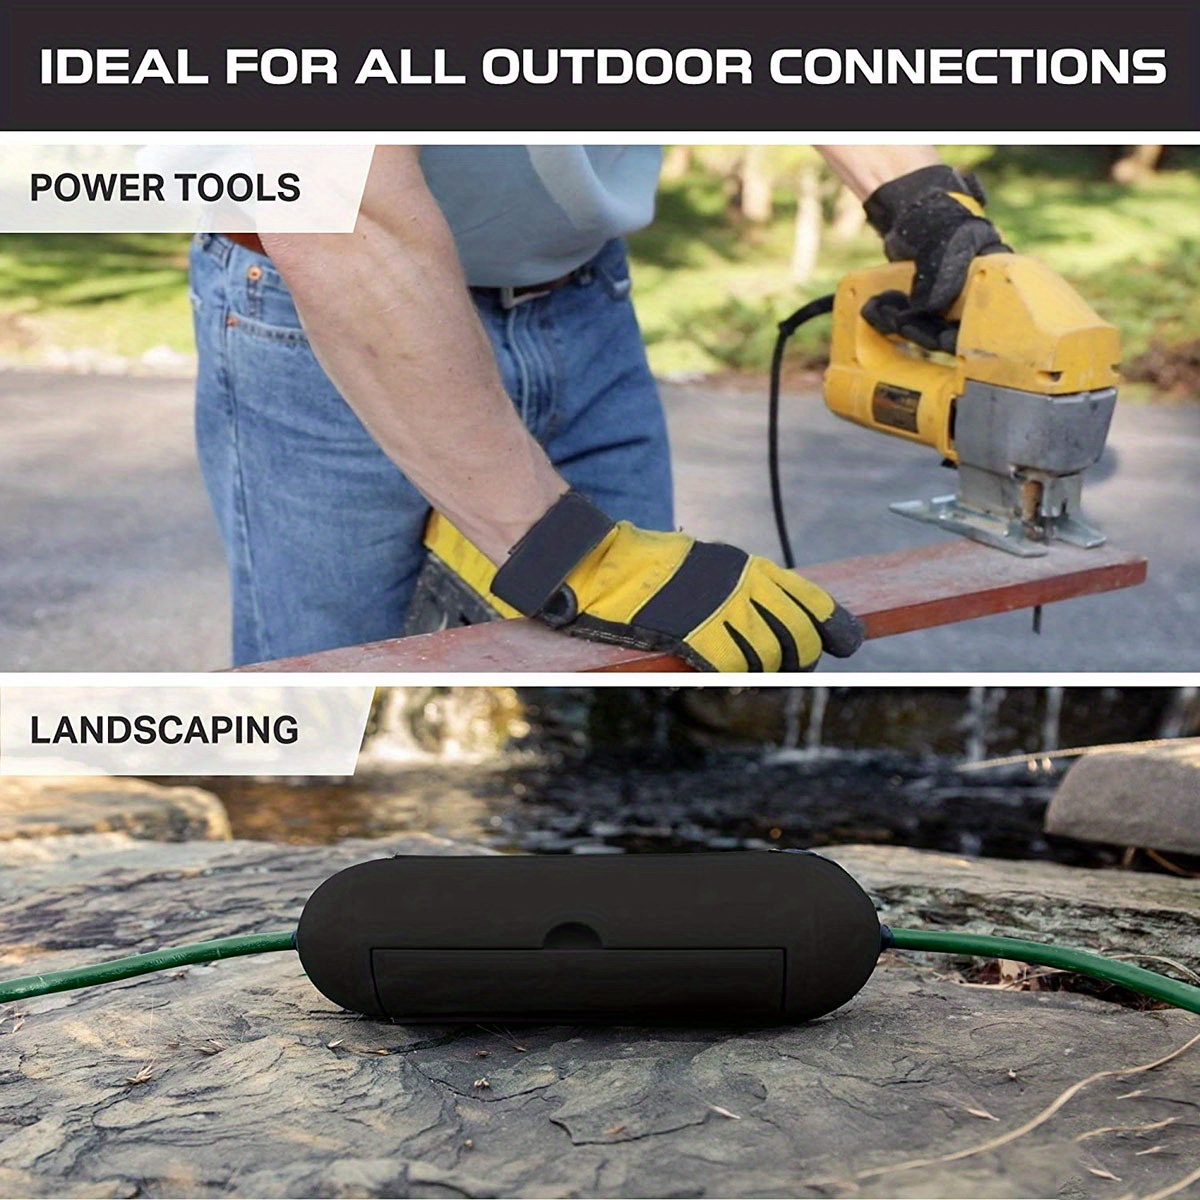 50 ft Extension Cord with Connector Safety Seal Protector Weatherproof -  Rated for Outdoors - EasyLife Tech by FAMATEL